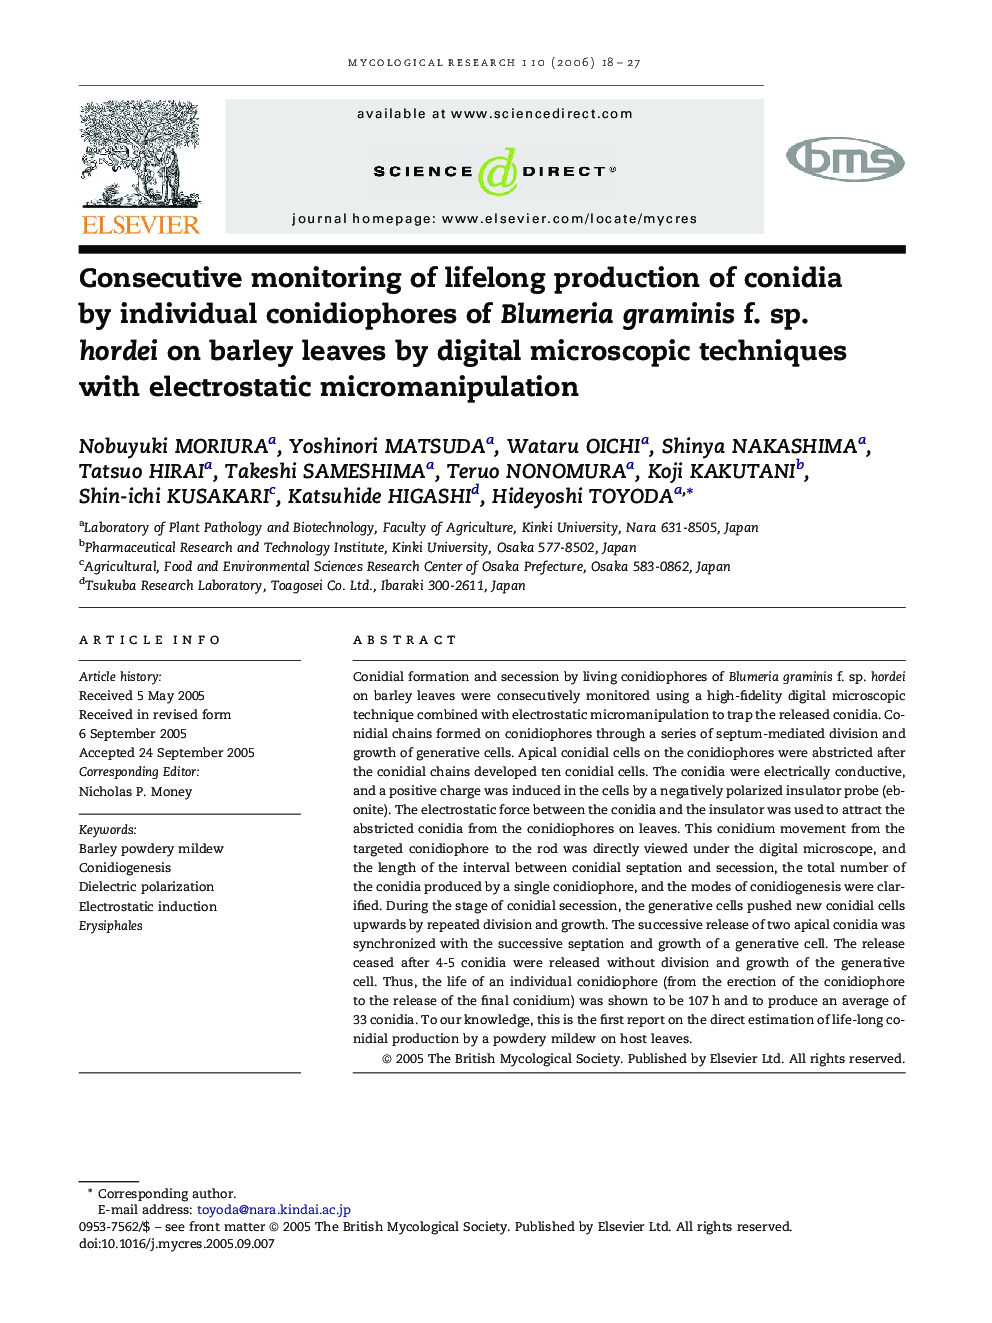 Consecutive monitoring of lifelong production of conidia by individual conidiophores of Blumeria graminis f. sp. hordei on barley leaves by digital microscopic techniques with electrostatic micromanipulation